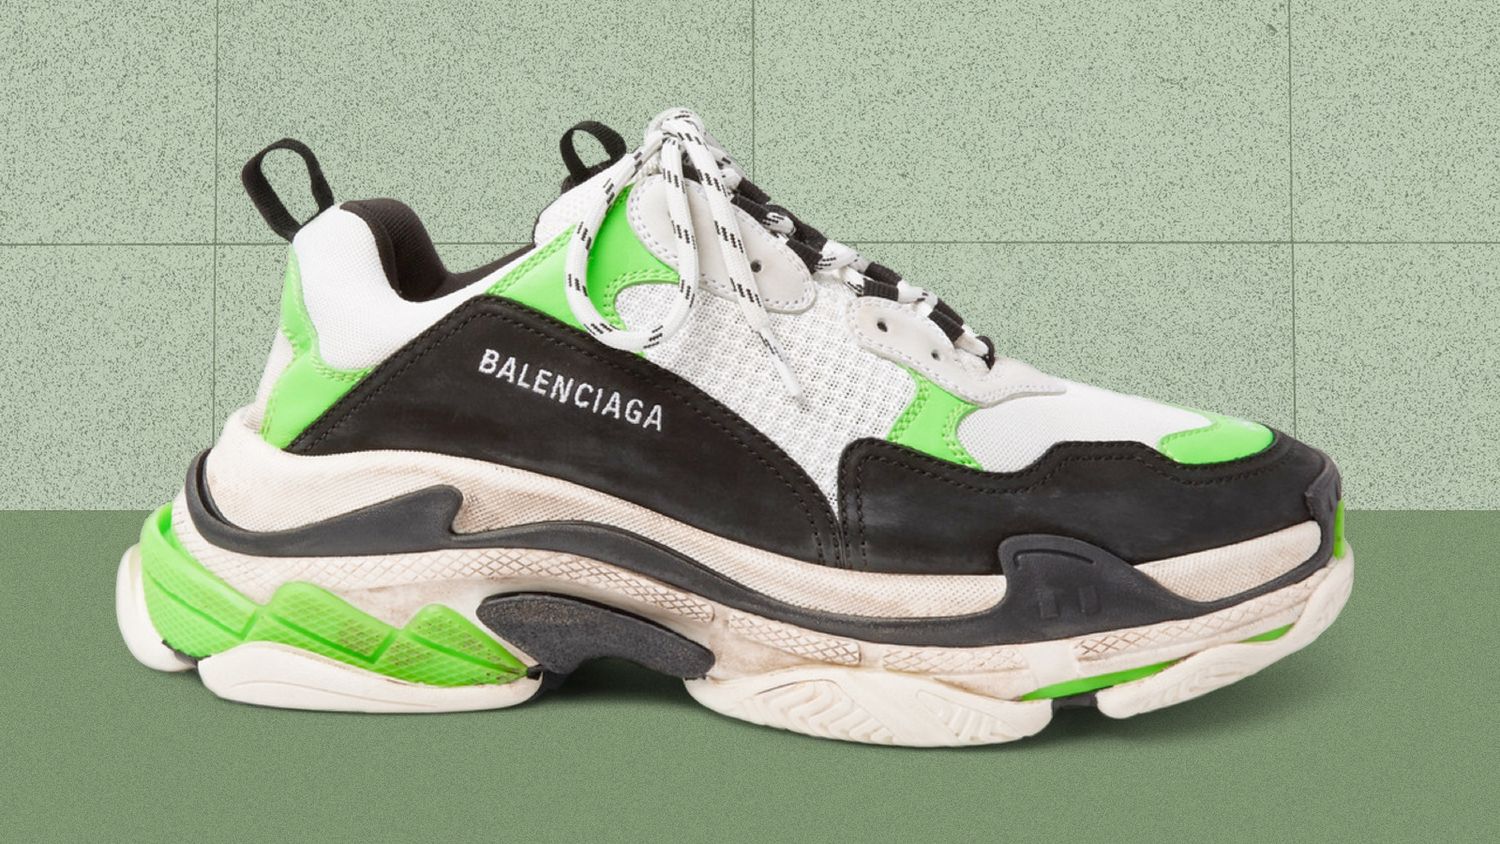 Why Balenciaga’s Triple S Sneaker Is A Work Of Art | The Journal | MR ...